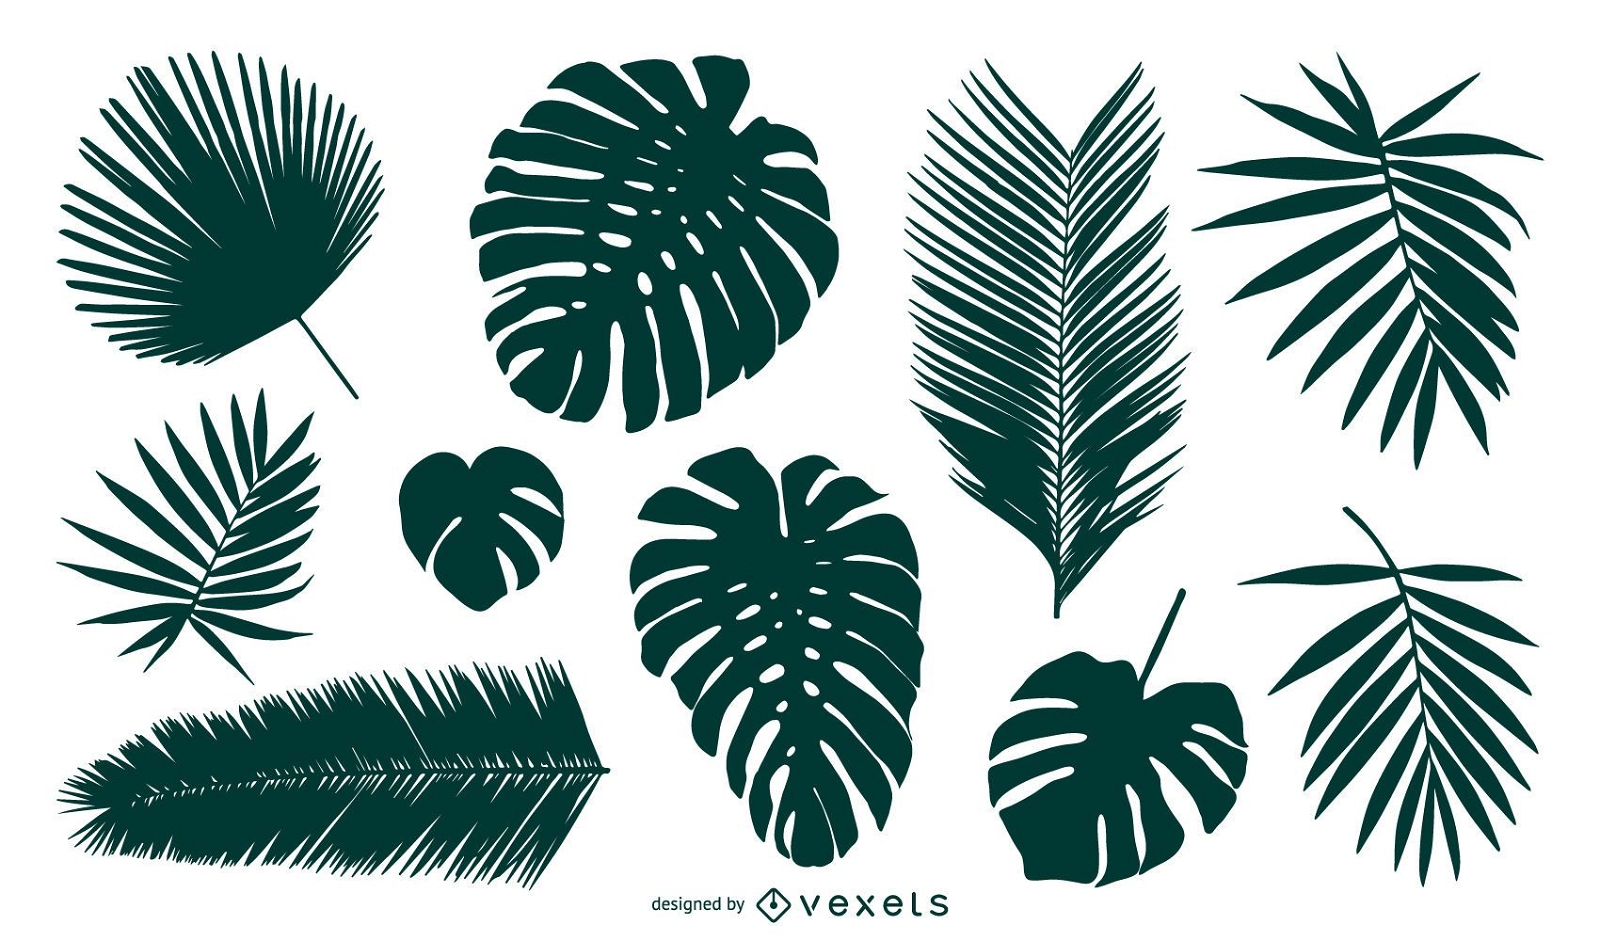 Silhouettes of palm tree leaves set.